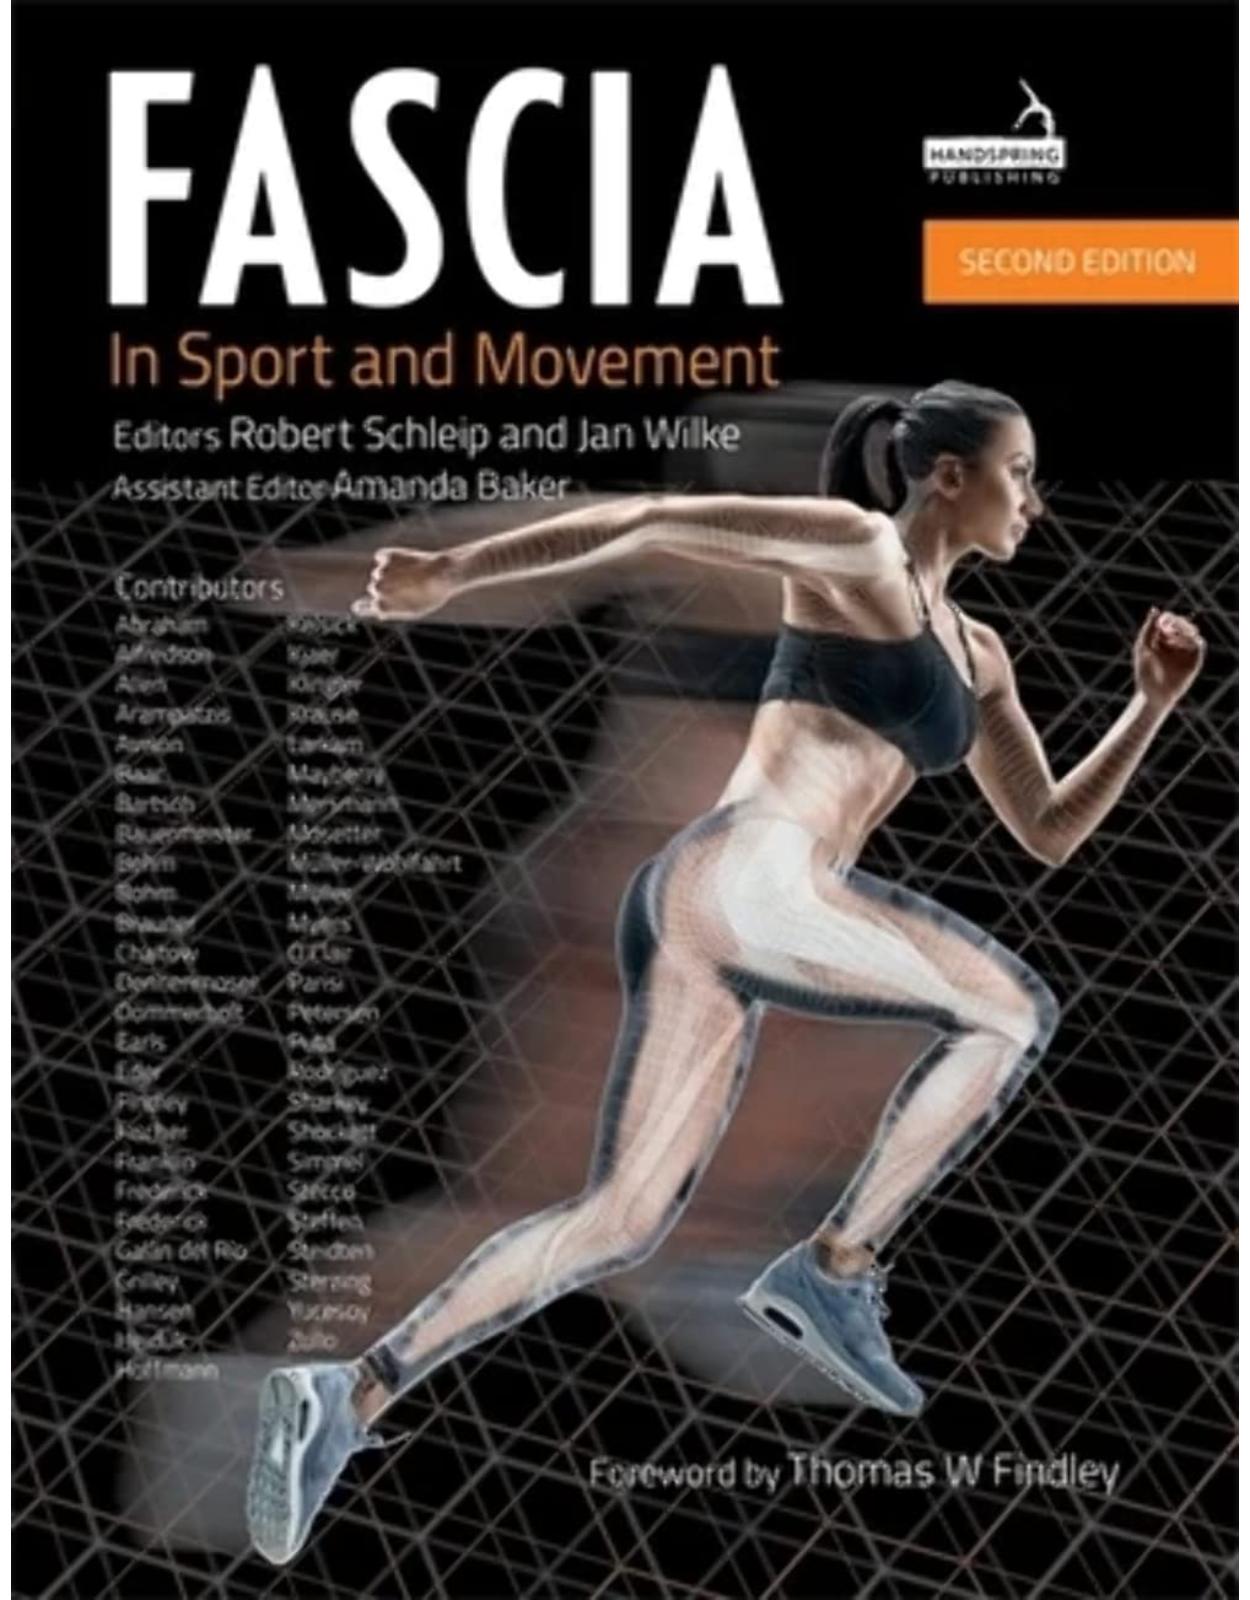 Fascia in Sport and Movement, Second edition